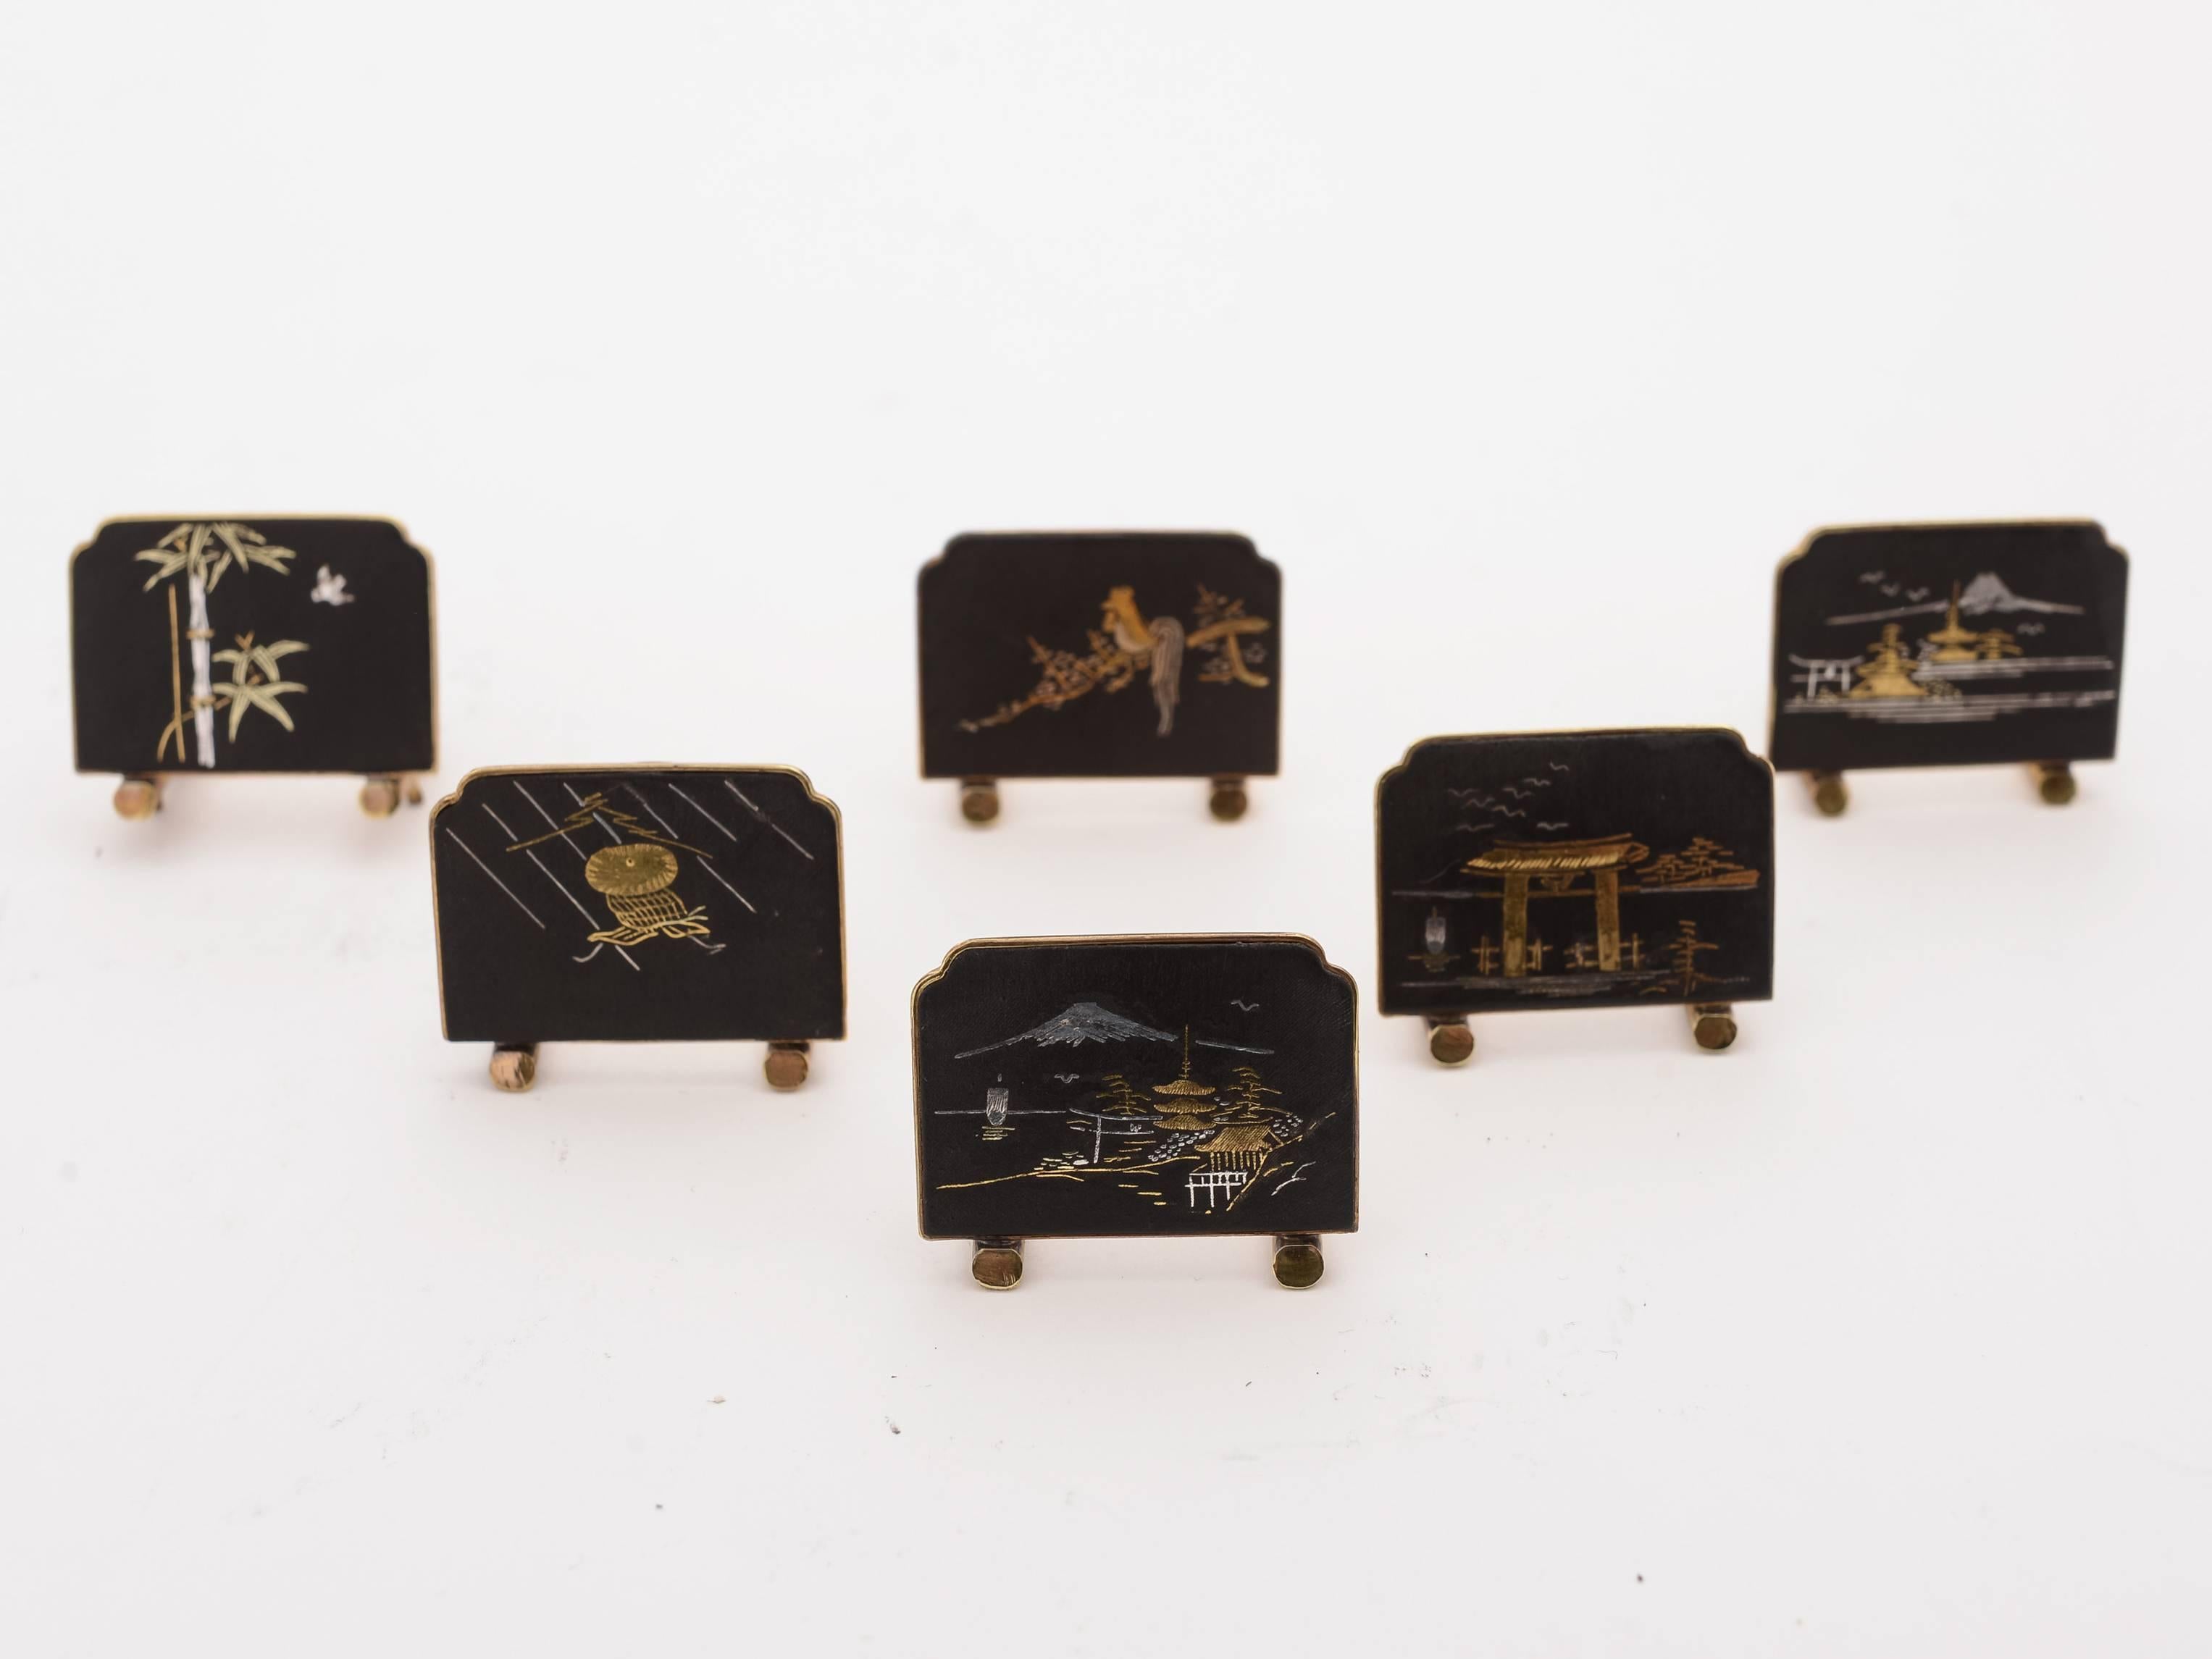 A stunning set of six Japanese Komai-Style brass menu holders with detailed scenes to the front of each in gold and silver, circa 1920.

Free worldwide delivery. 

Measurements:
Height: 1